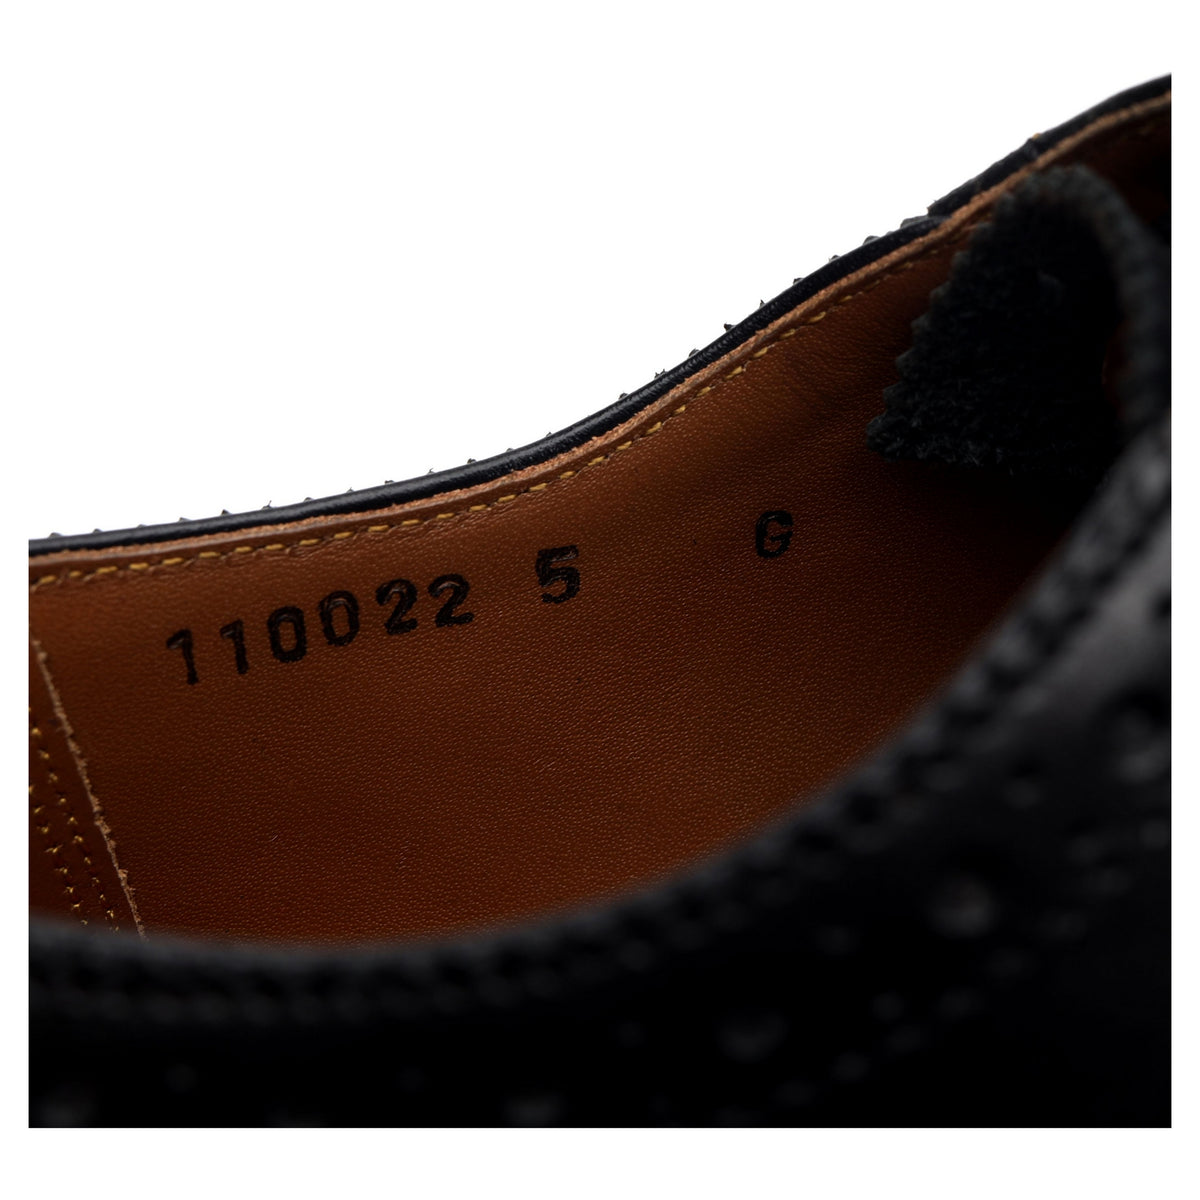 &#39;Angus&#39; Black Leather Oxford Brogues UK 5 G